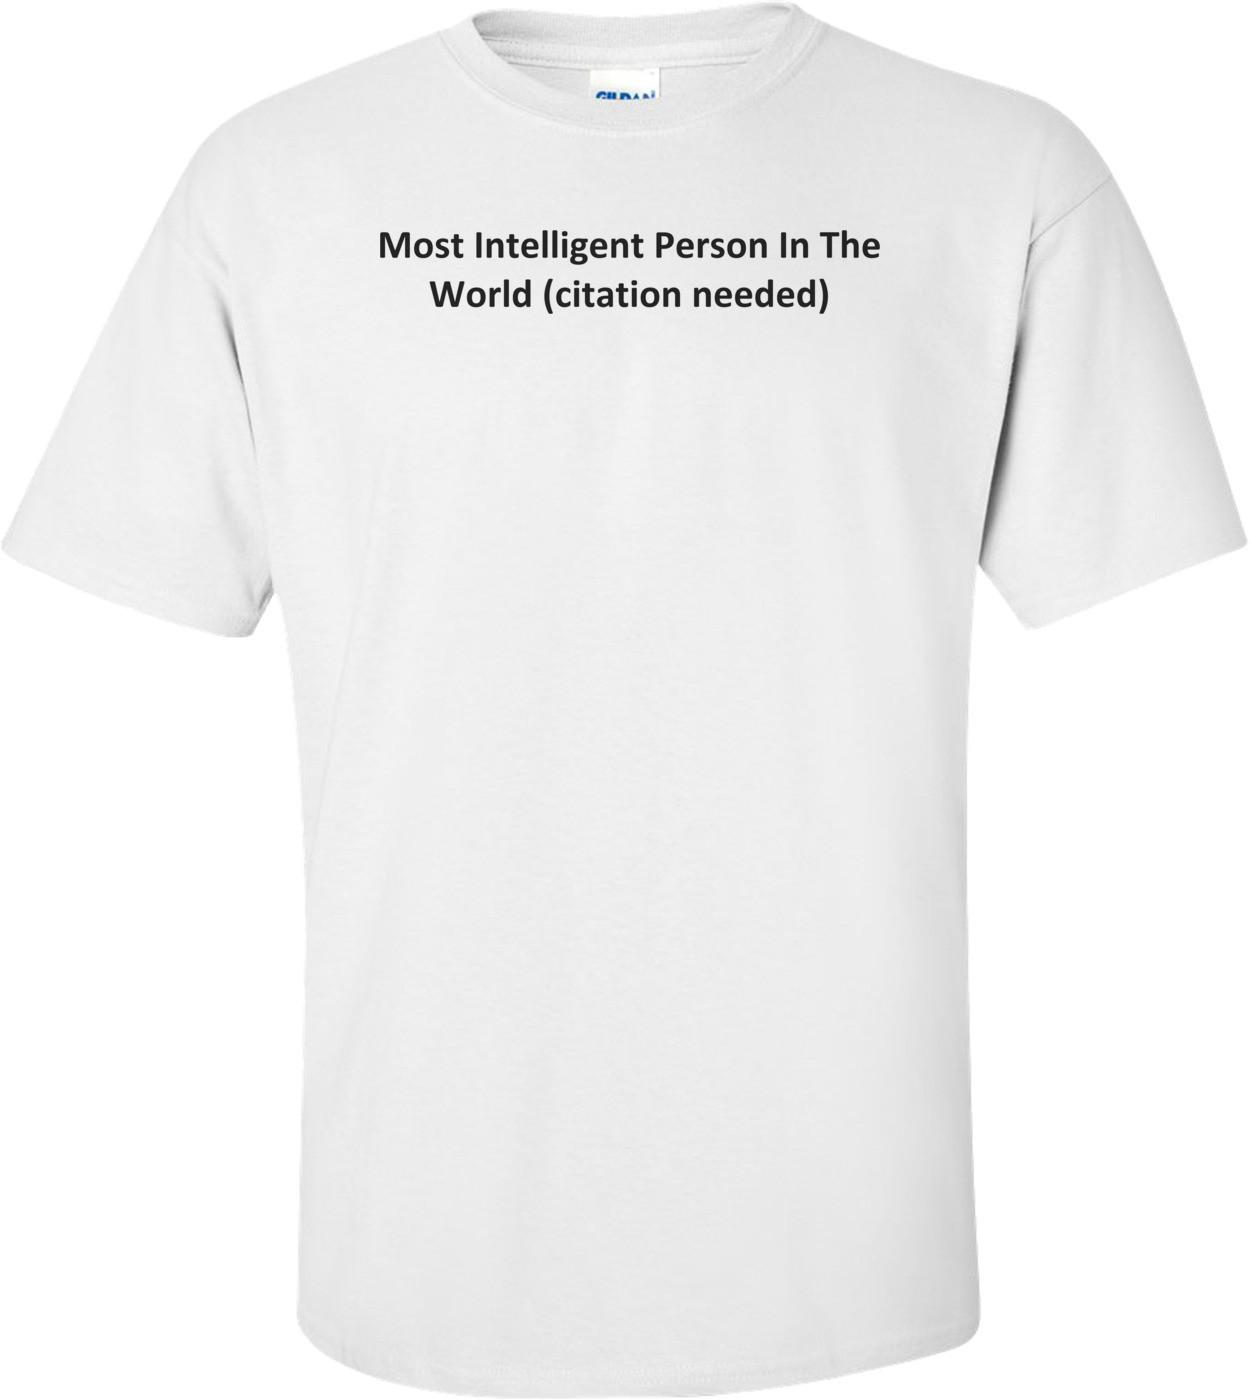 Most Intelligent Person In The World (citation needed) Shirt